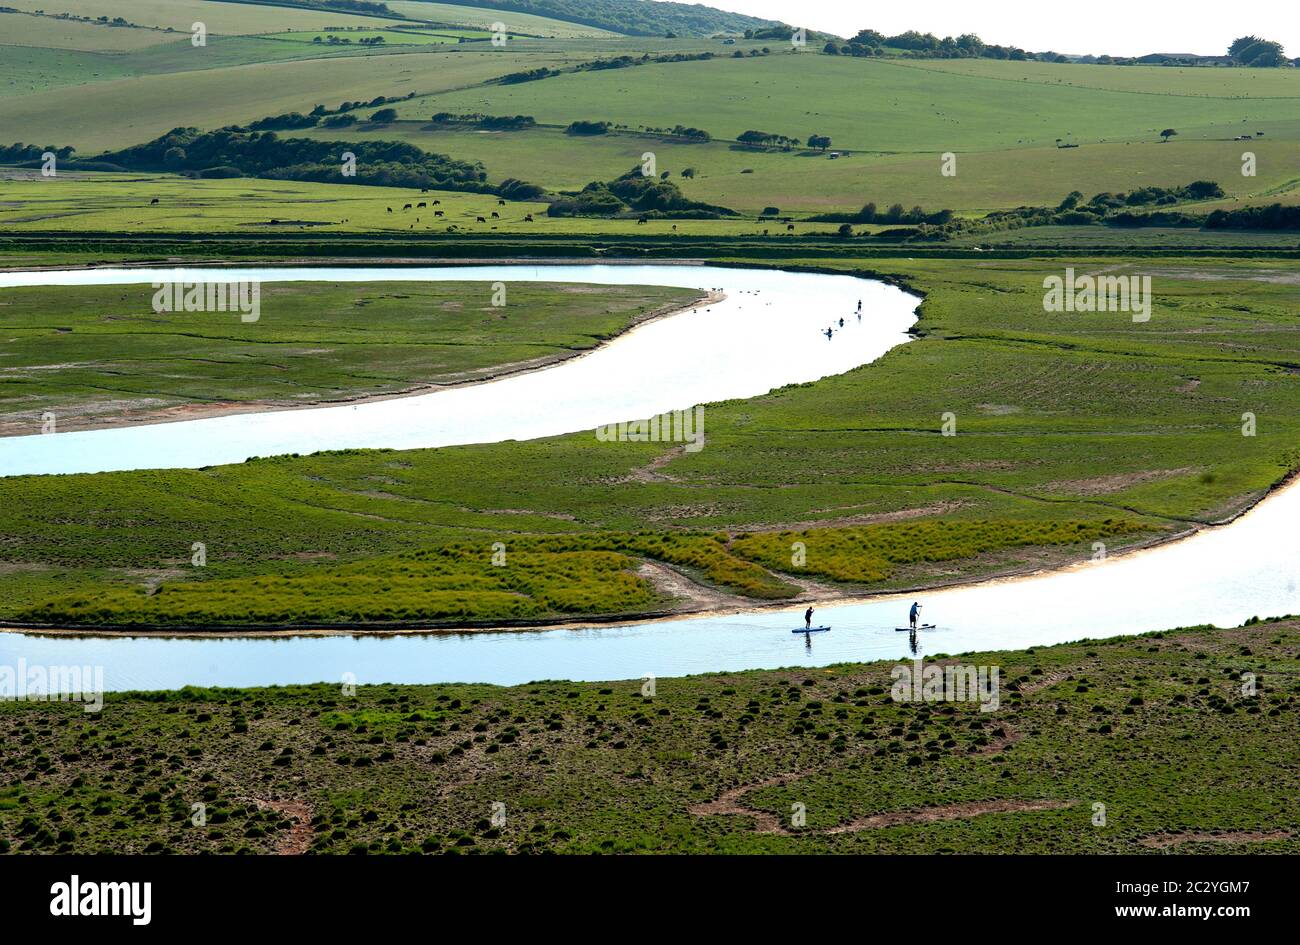 Paddle-boarders on the River Cuckmere in Sussex, England Stock Photo